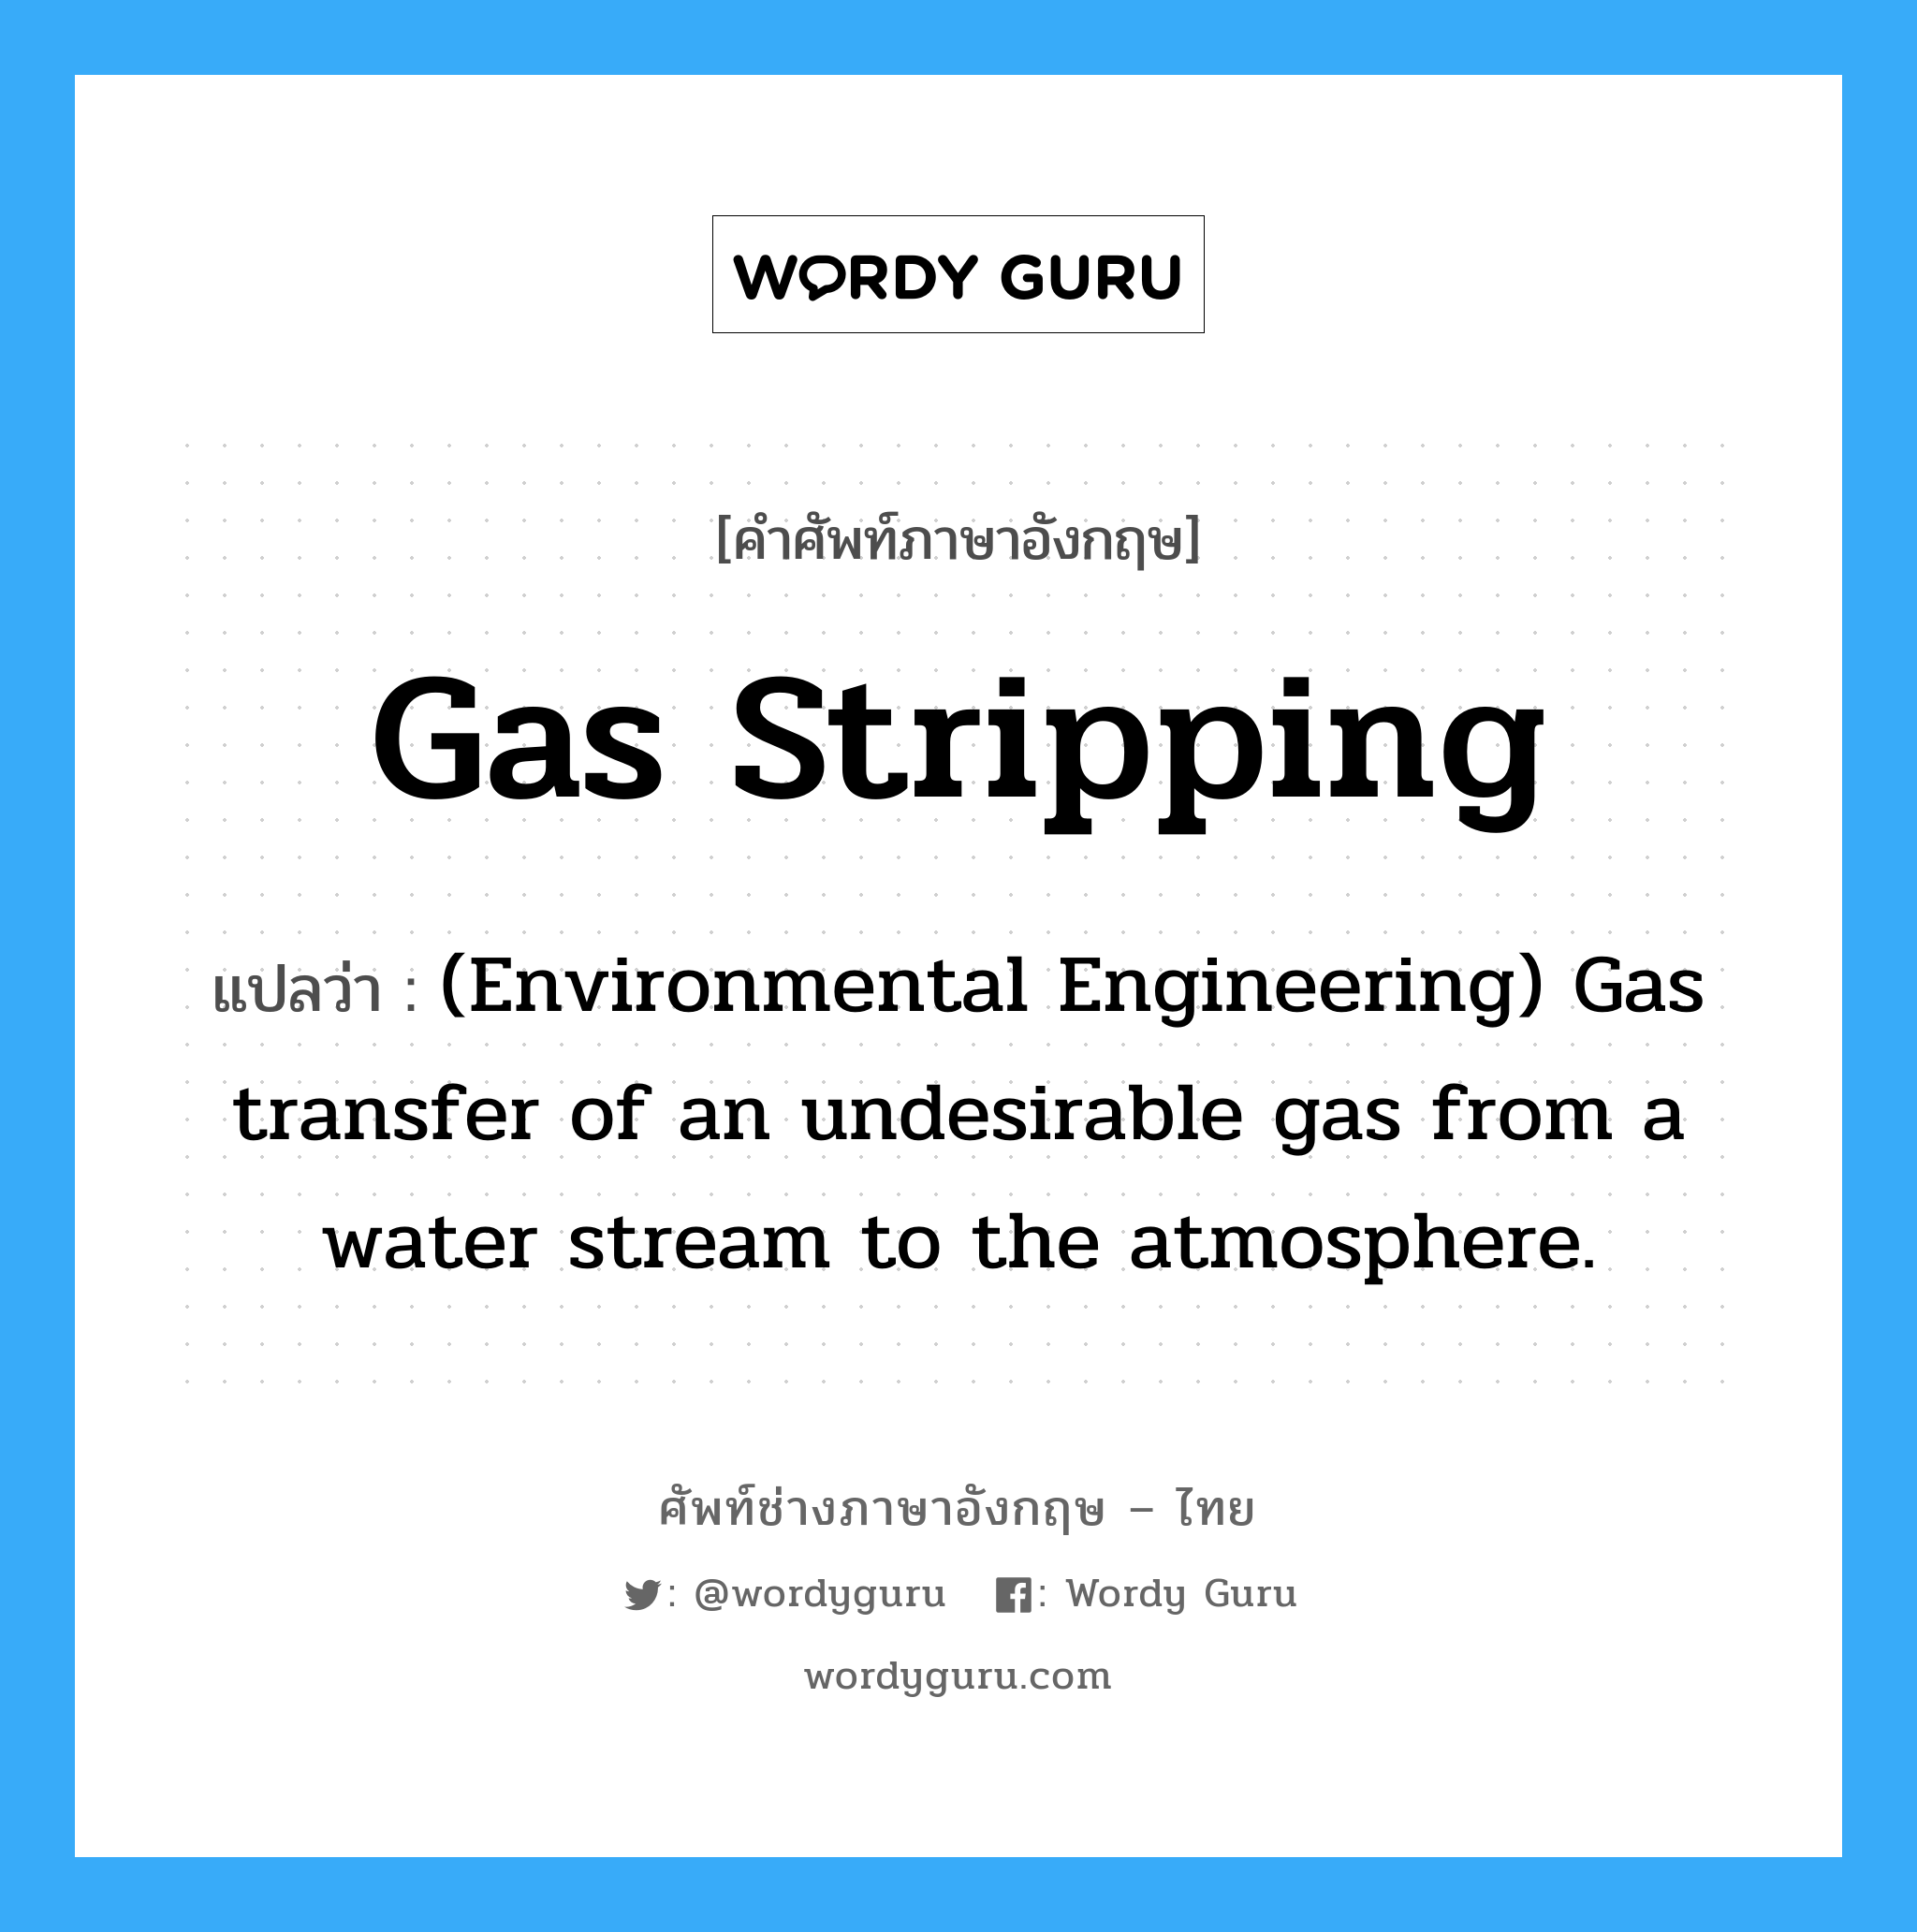 Gas stripping แปลว่า?, คำศัพท์ช่างภาษาอังกฤษ - ไทย Gas stripping คำศัพท์ภาษาอังกฤษ Gas stripping แปลว่า (Environmental Engineering) Gas transfer of an undesirable gas from a water stream to the atmosphere.